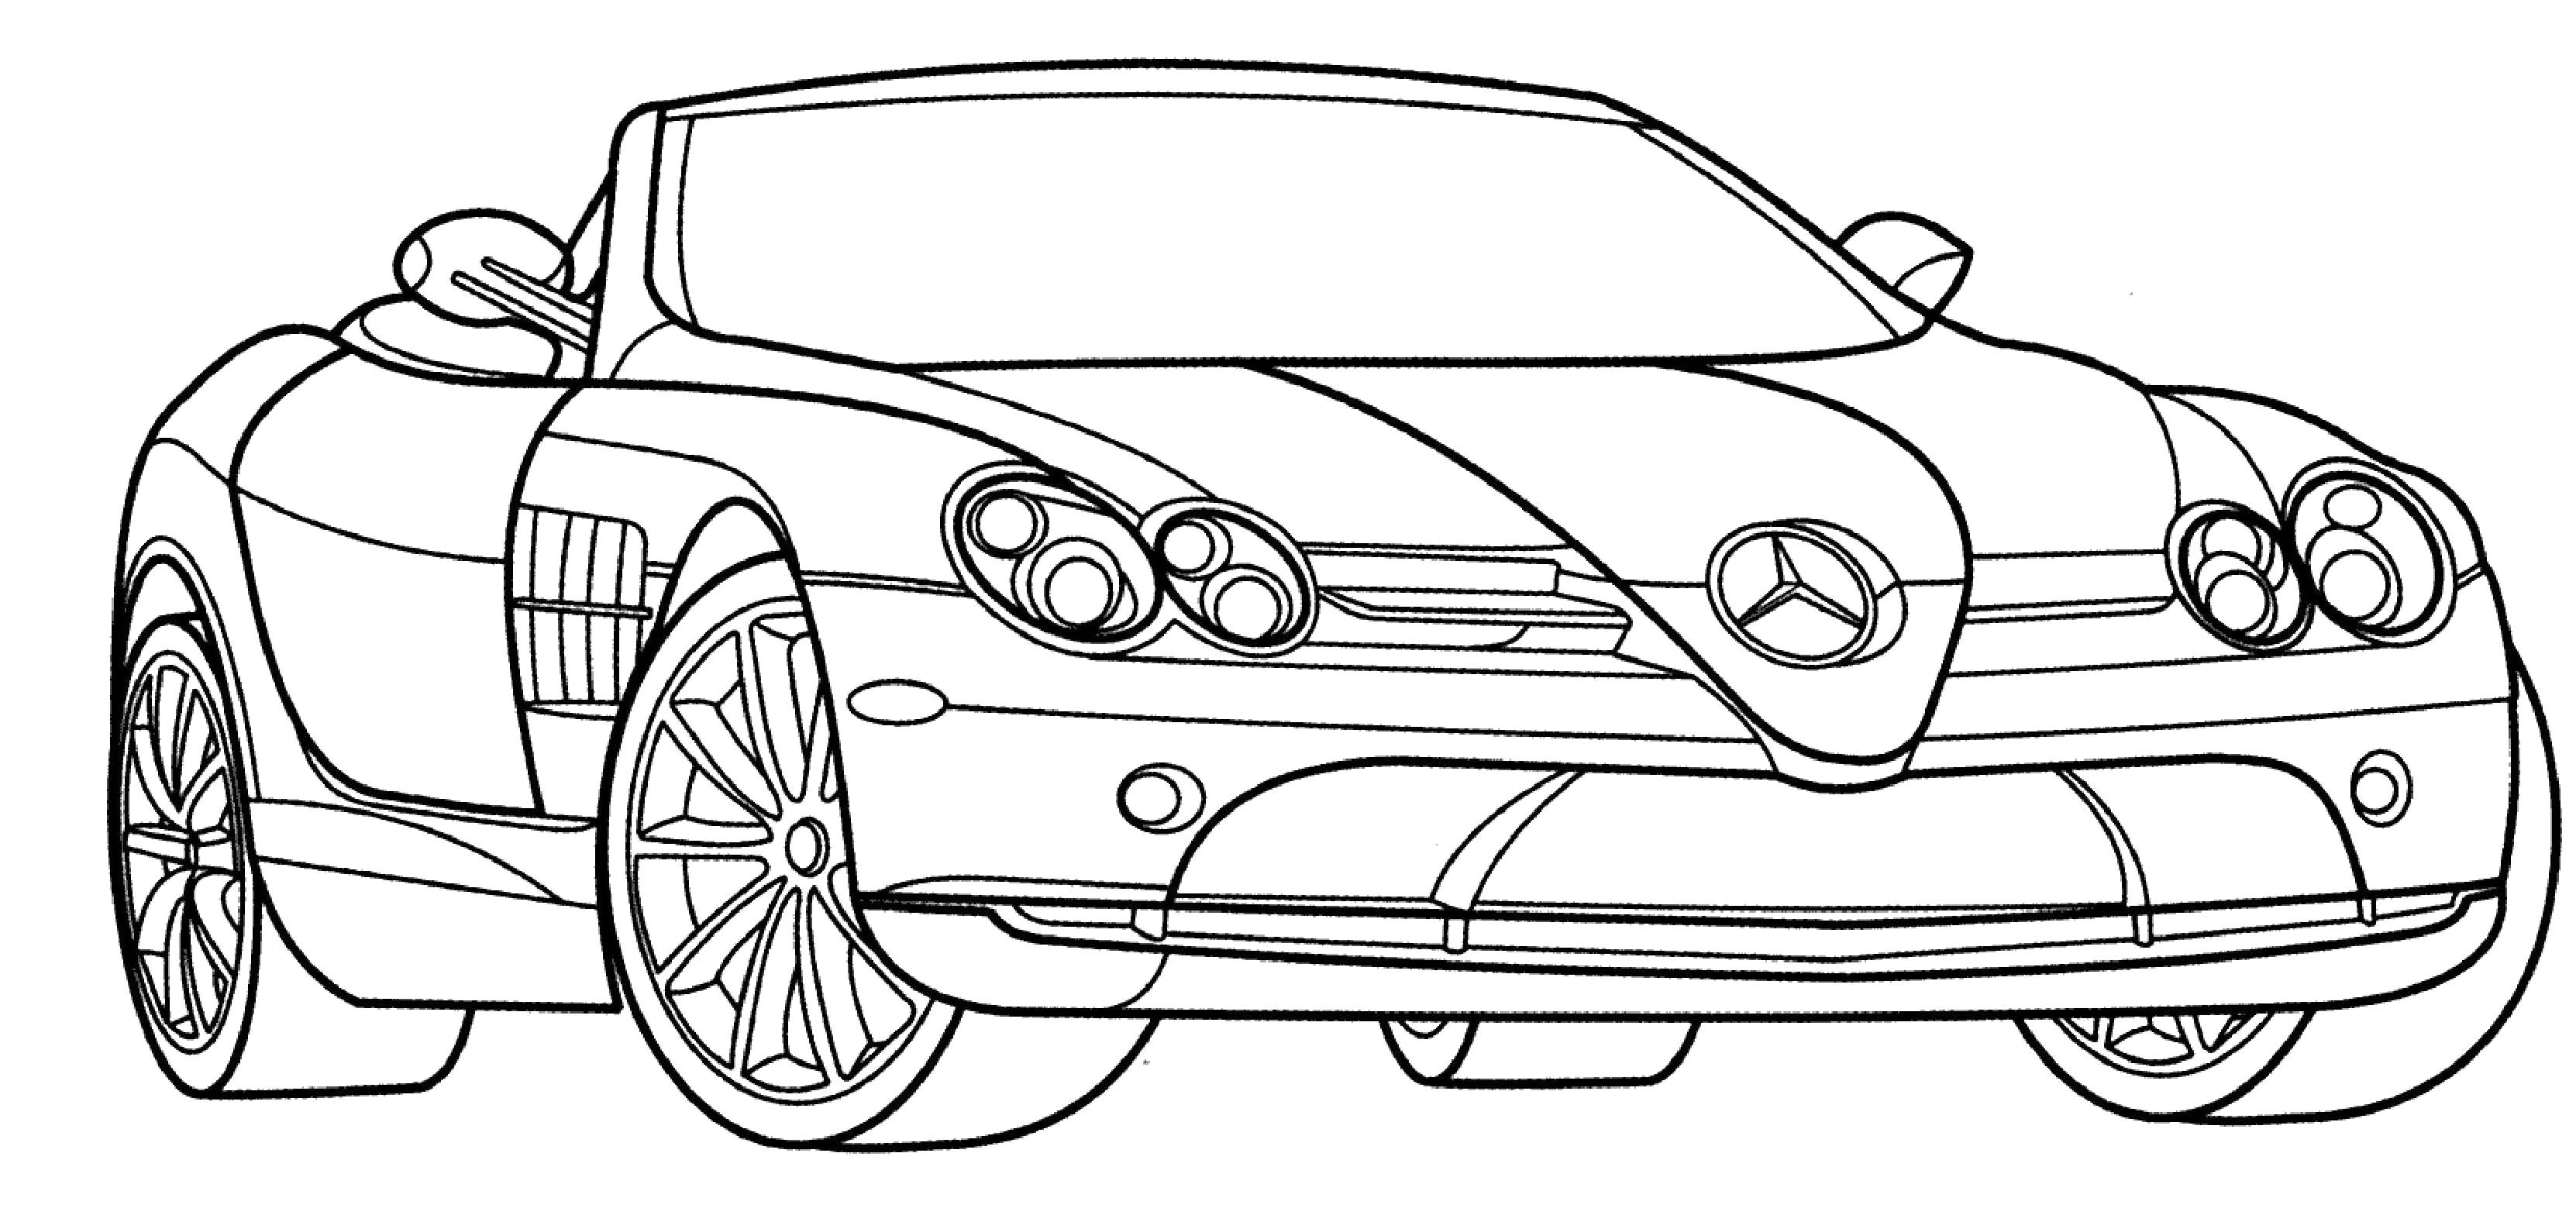 coloring-pages-sports-car-tuning-transportation-printable